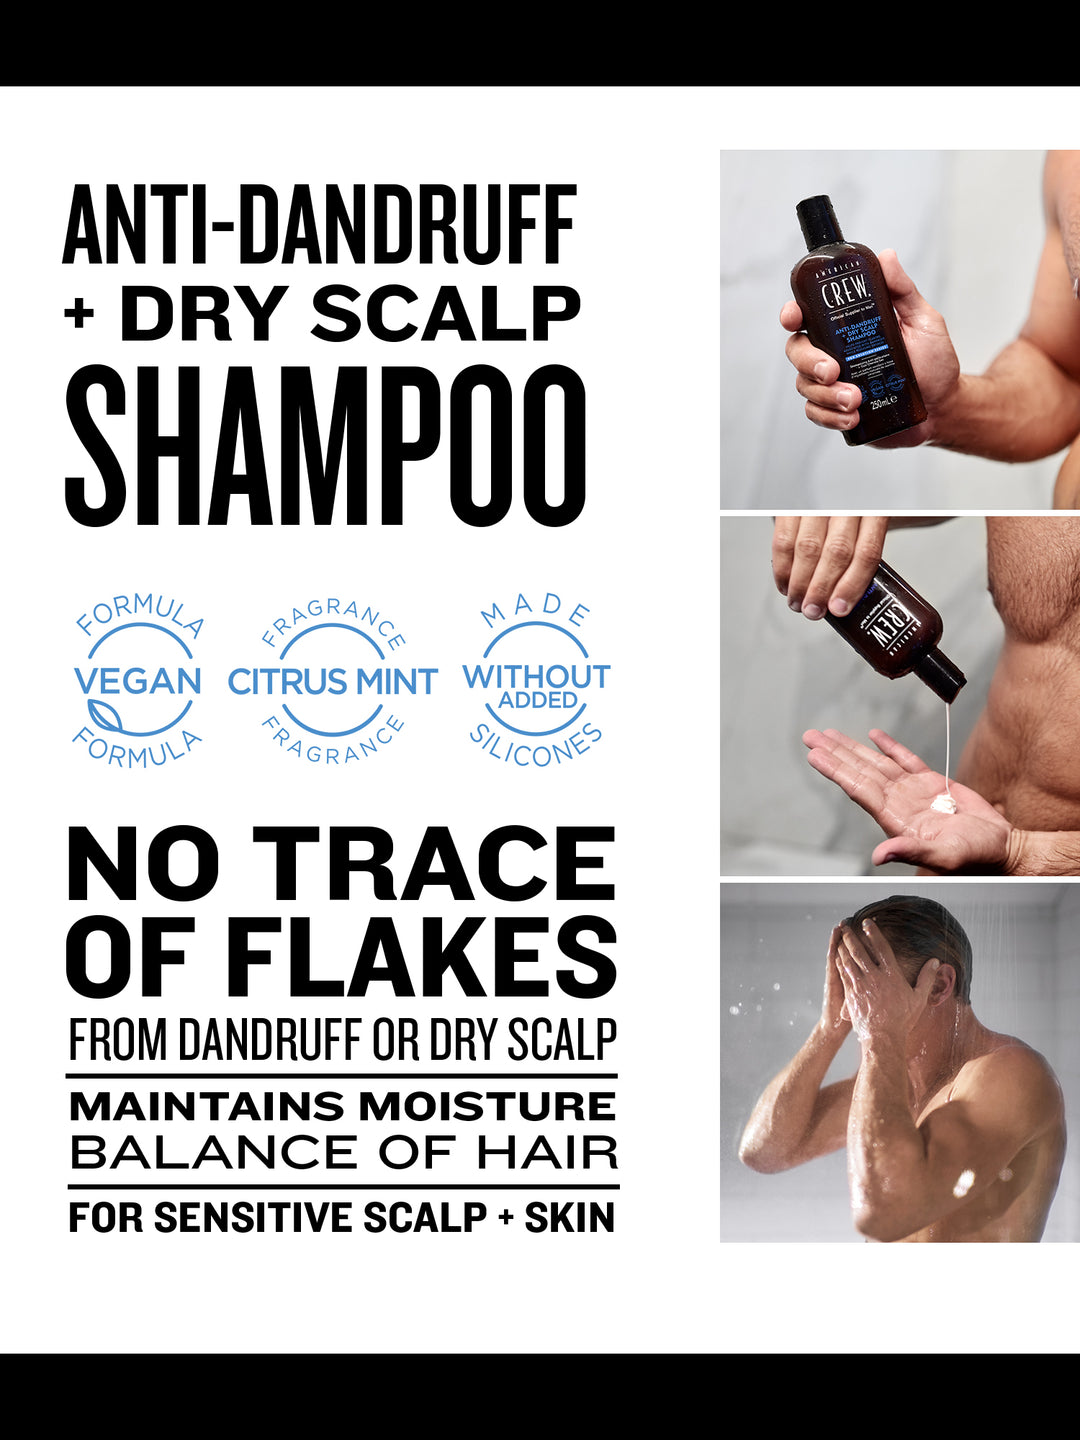 Anti-dandruff + Dry Scalp Shampoo- vegan, citrus mint, no added silicones, no trace of flakes from dandruff or dry scalp, maintains moisture, balance of hair, for sensitive scalp + skin